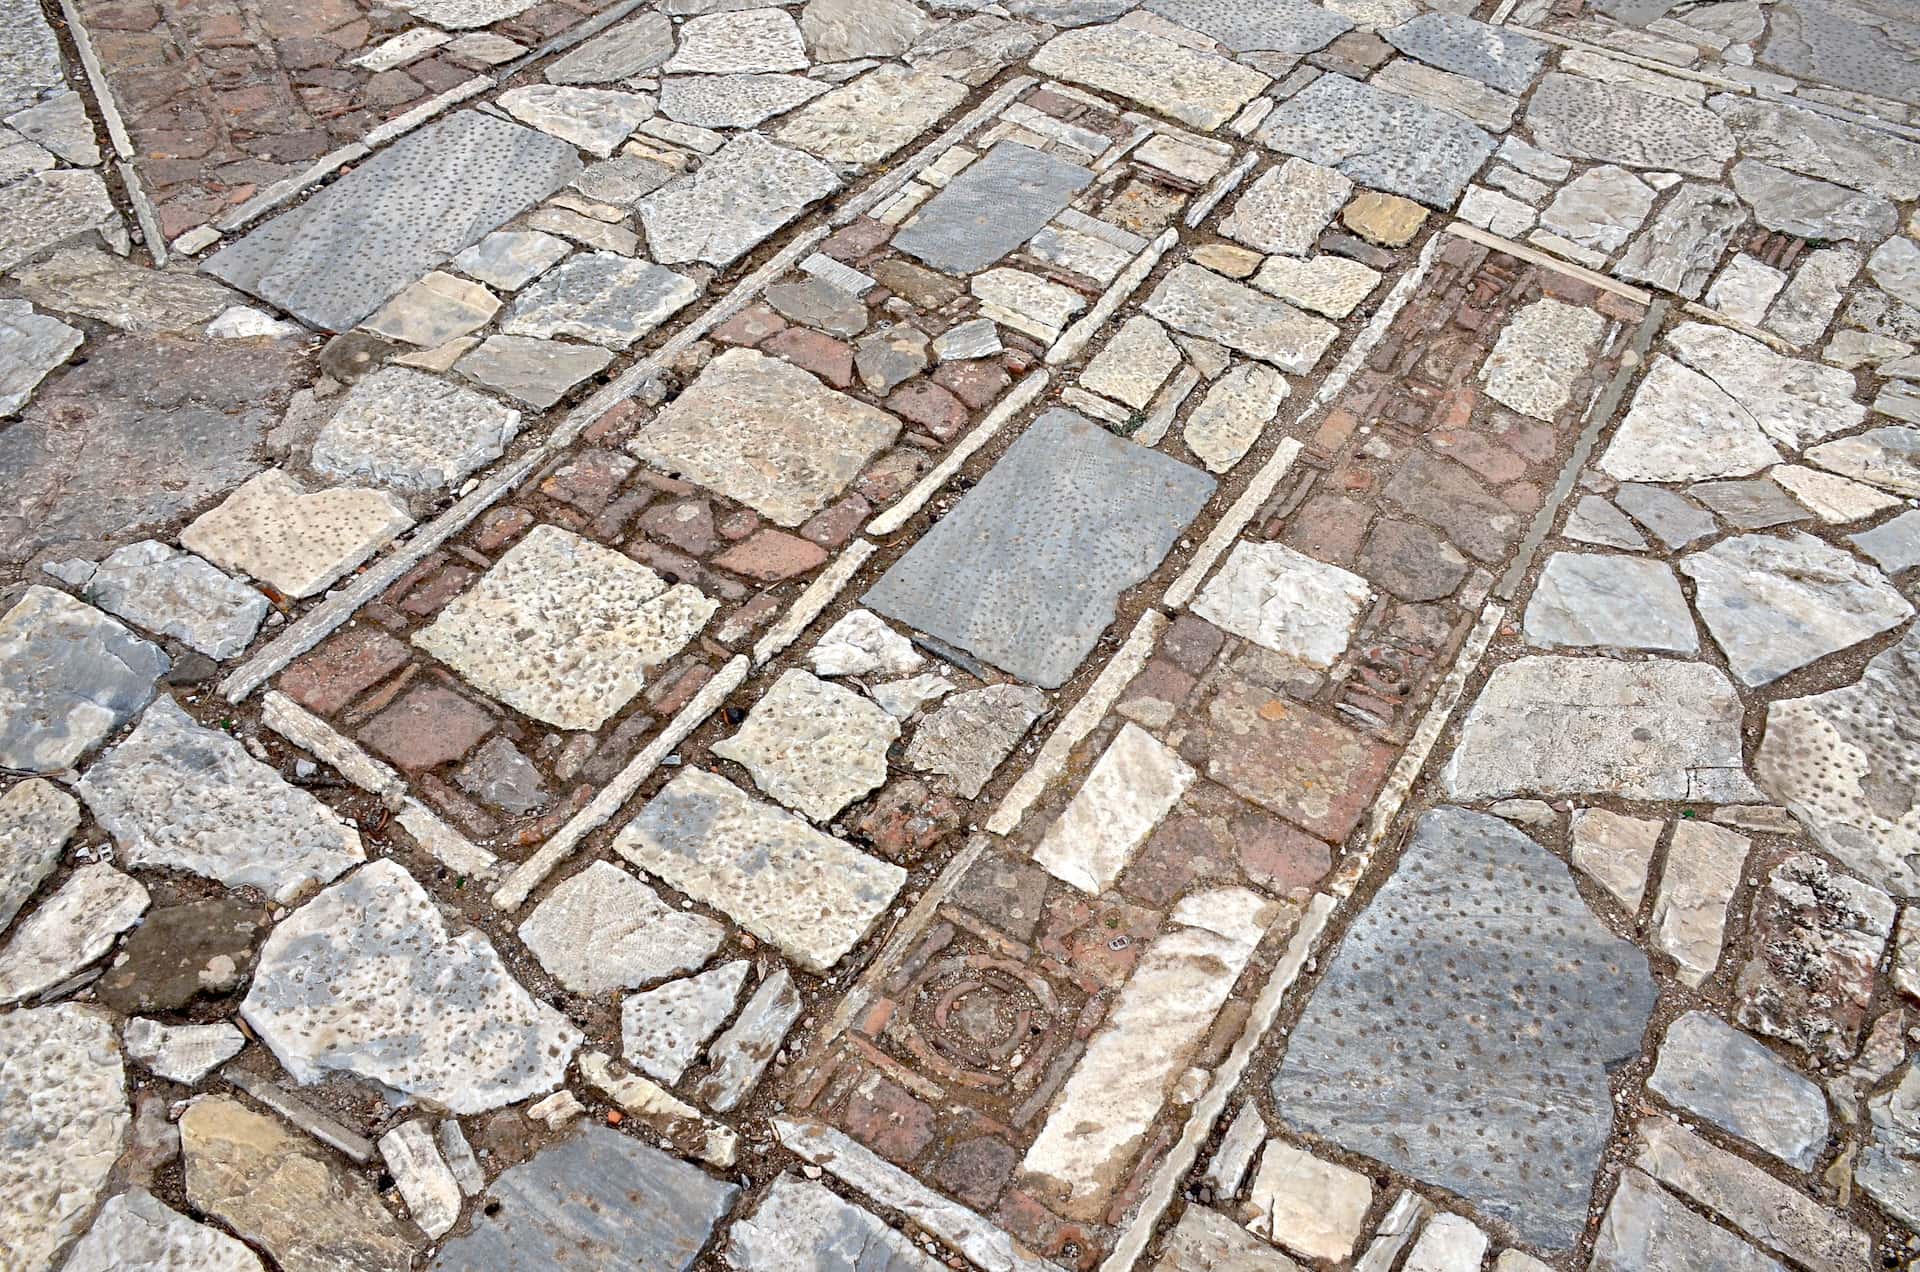 Paving stones of the Anderon on the Hill of the Muses (Philopappos Hill) in the Western Hills of Athens, Greece